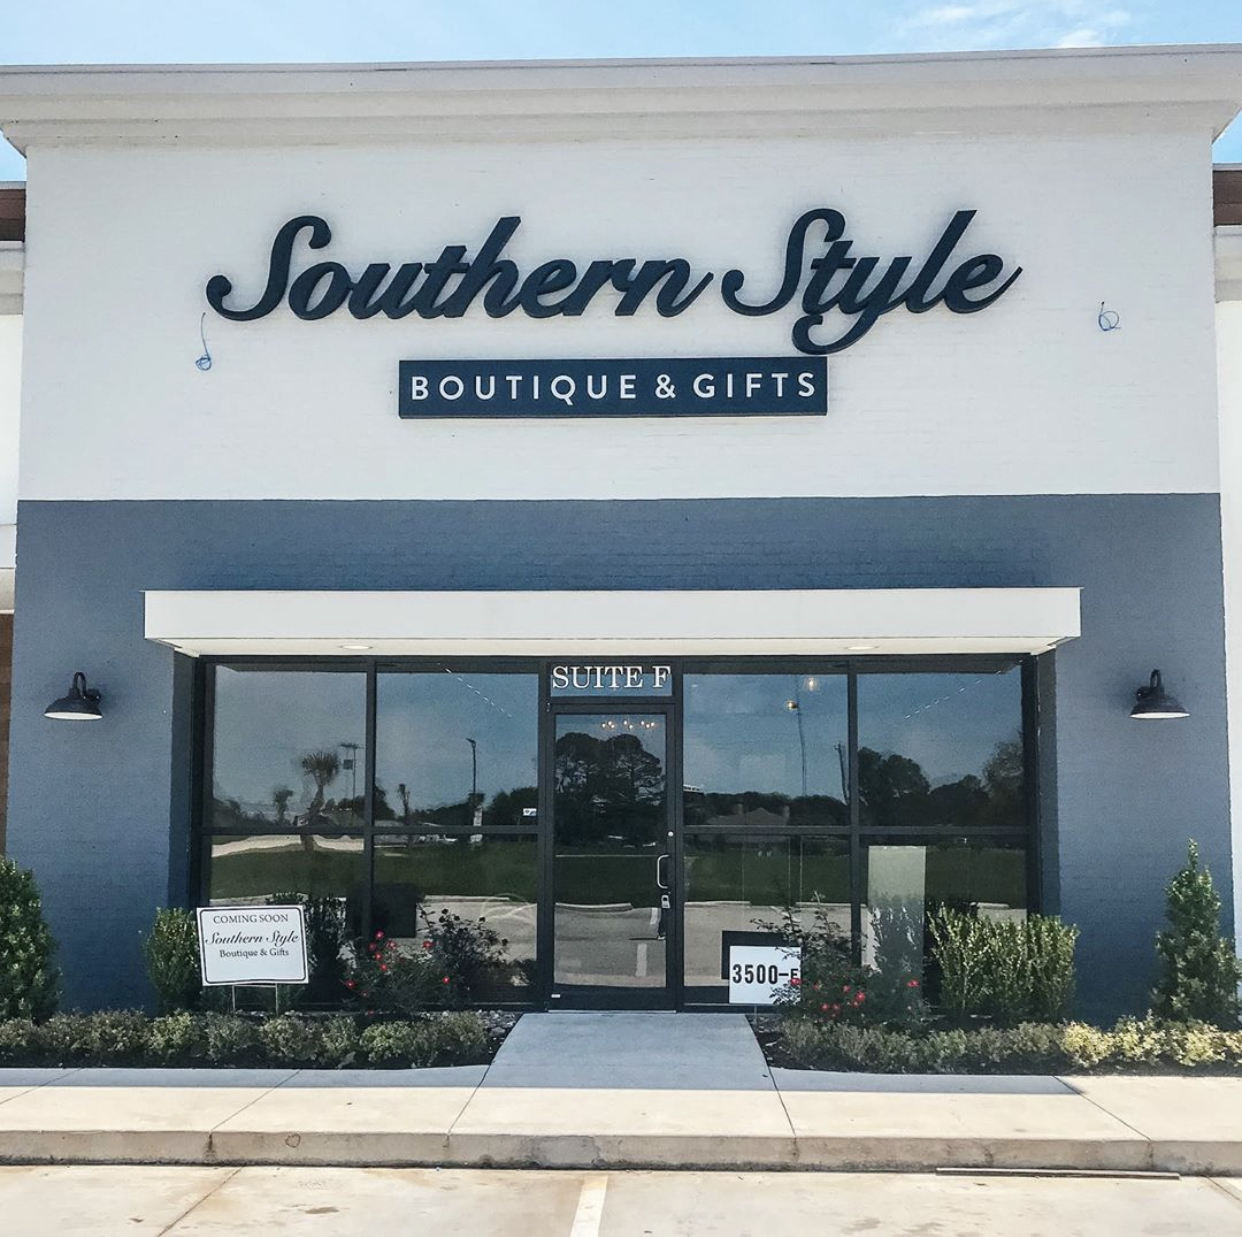 Southern Style Boutique & Gifts